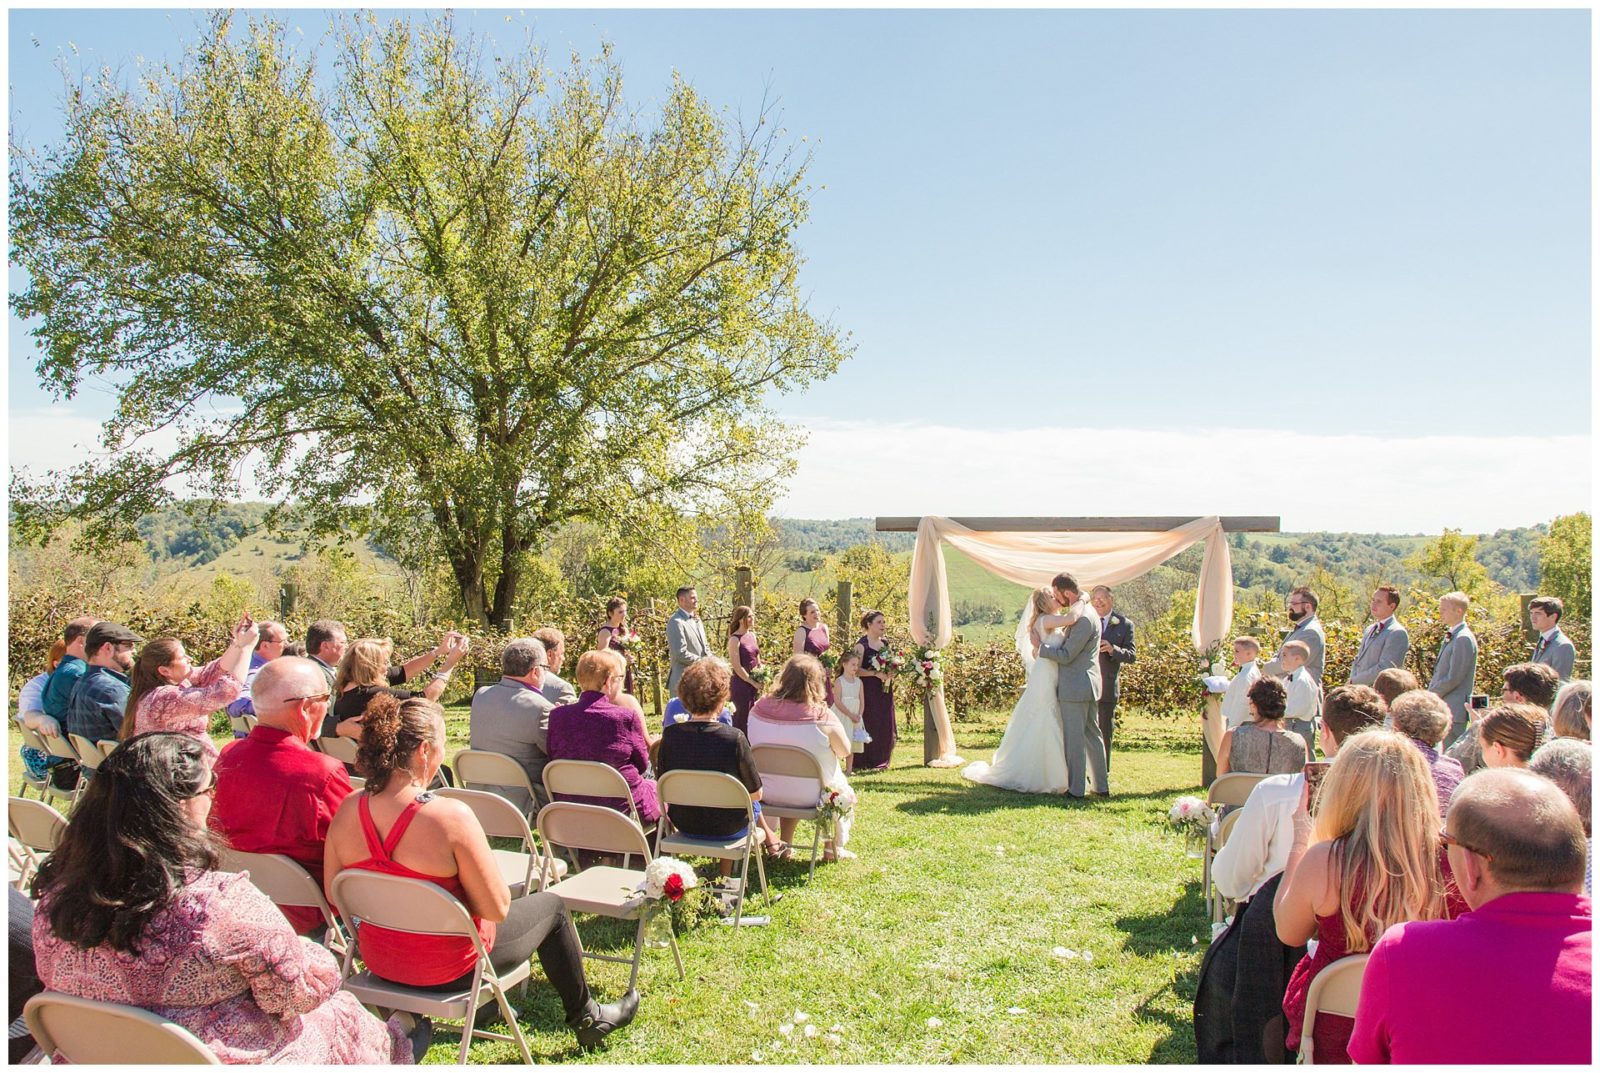 Wedding outdoor ceremony photos at the First Vineyard in Nicholasville, Kentucky.